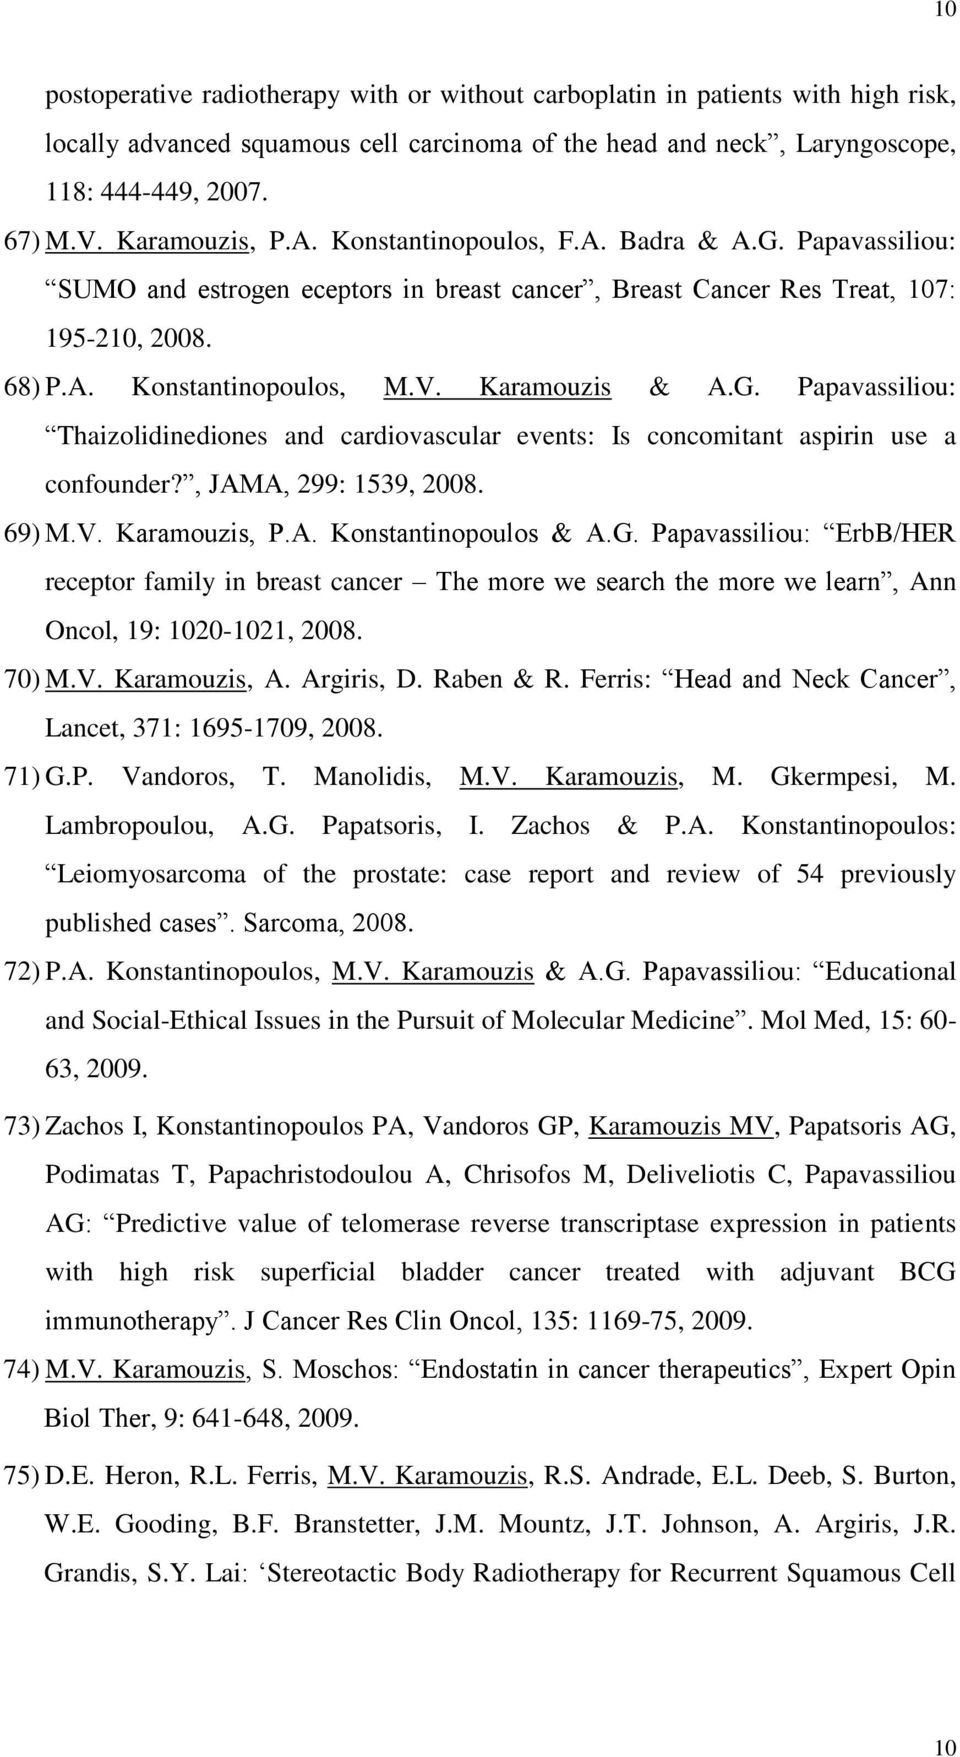 Karamouzis & A.G. Papavassiliou: Thaizolidinediones and cardiovascular events: Is concomitant aspirin use a confounder?, JAMA, 299: 1539, 2008. 69) M.V. Karamouzis, P.A. Konstantinopoulos & A.G. Papavassiliou: ErbB/HER receptor family in breast cancer The more we search the more we learn, Ann Oncol, 19: 1020-1021, 2008.